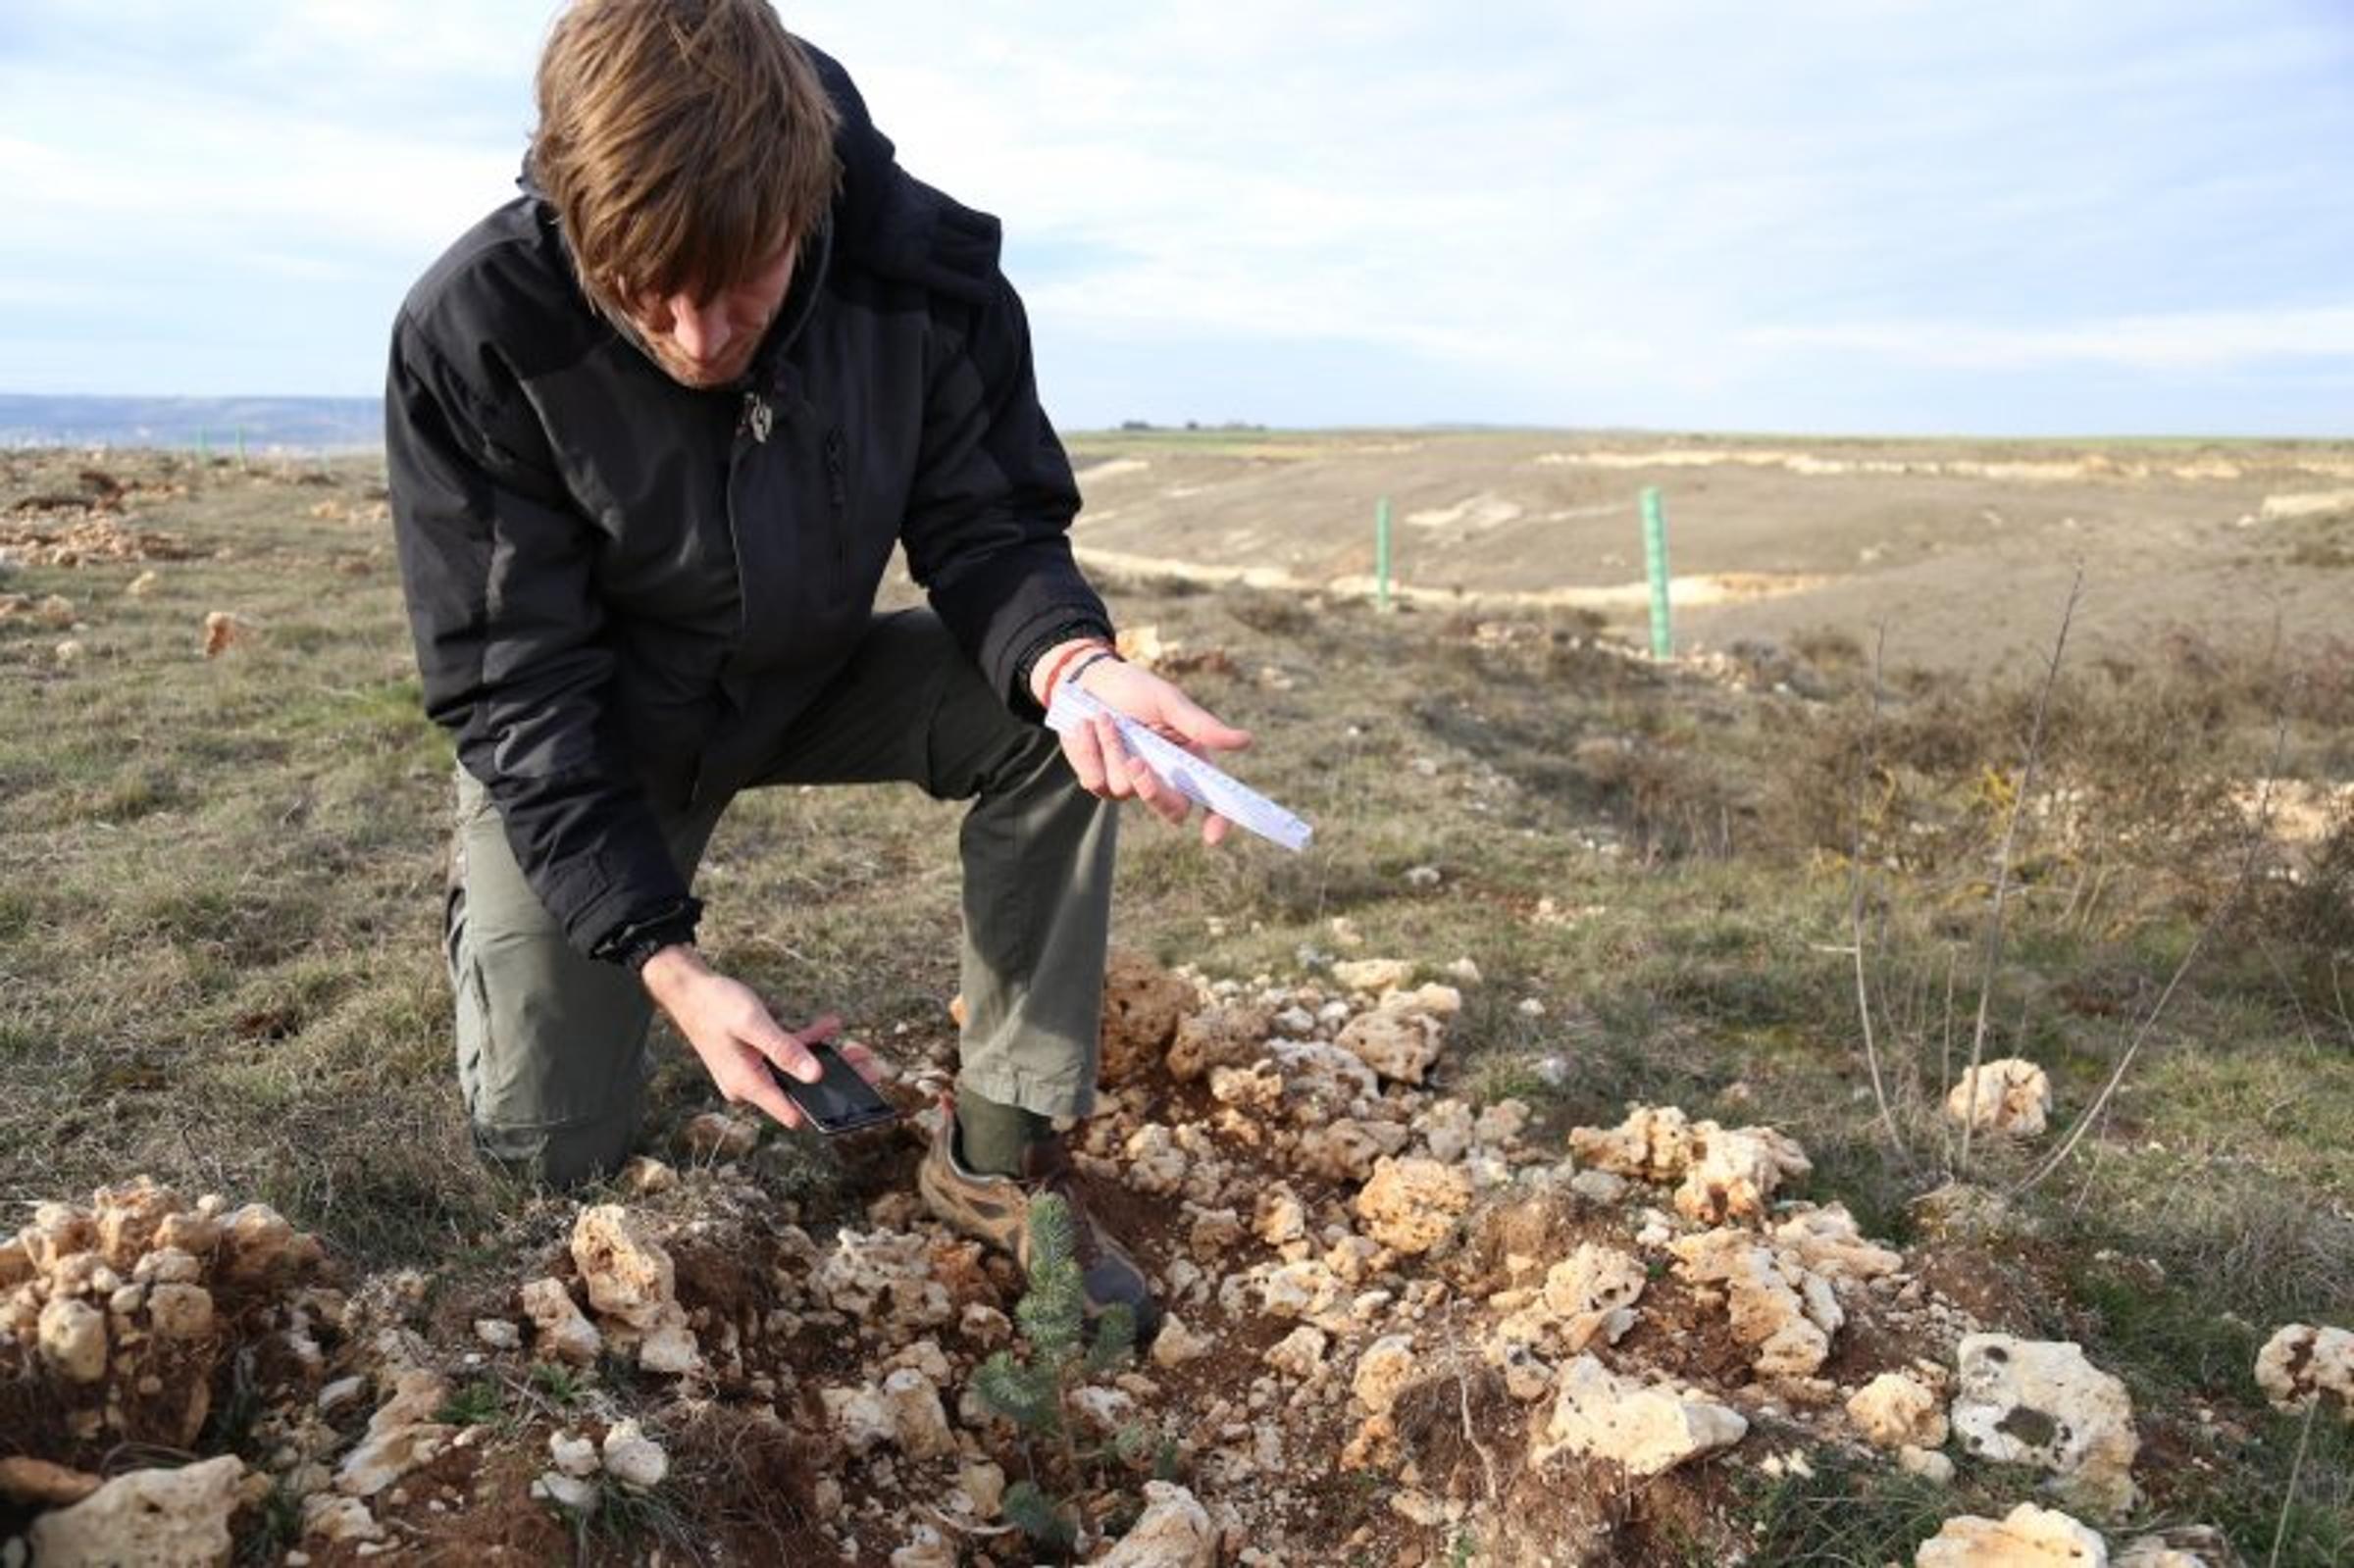 Project manager, Hielke Heida, uses the monitoring app we developed in-house to collect data on a planting in Spain.